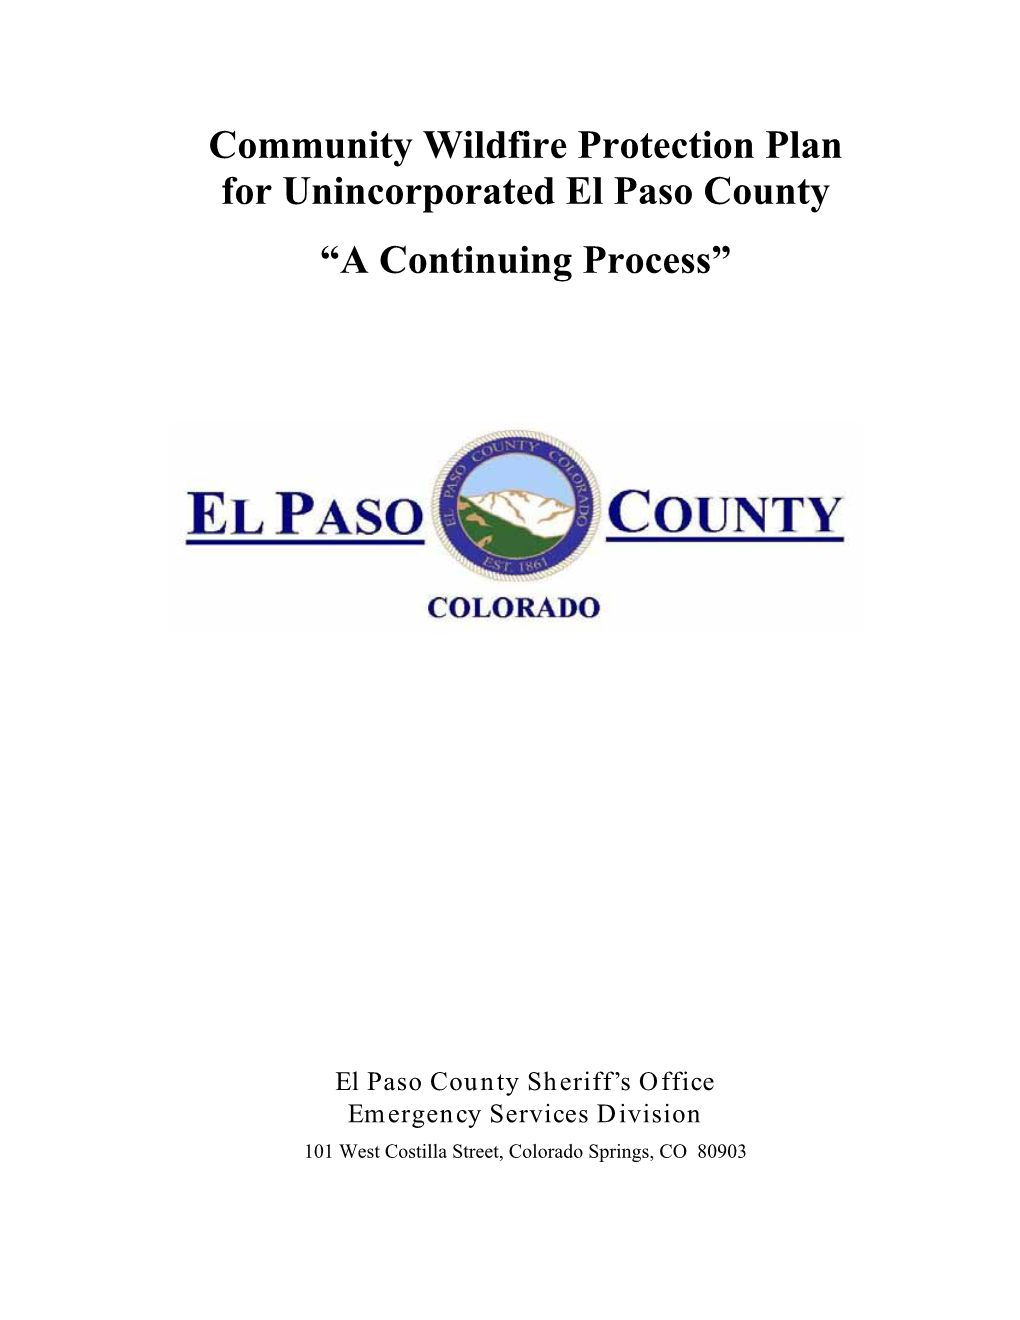 Community Wildfire Protection Plan for Unincorporated El Paso County